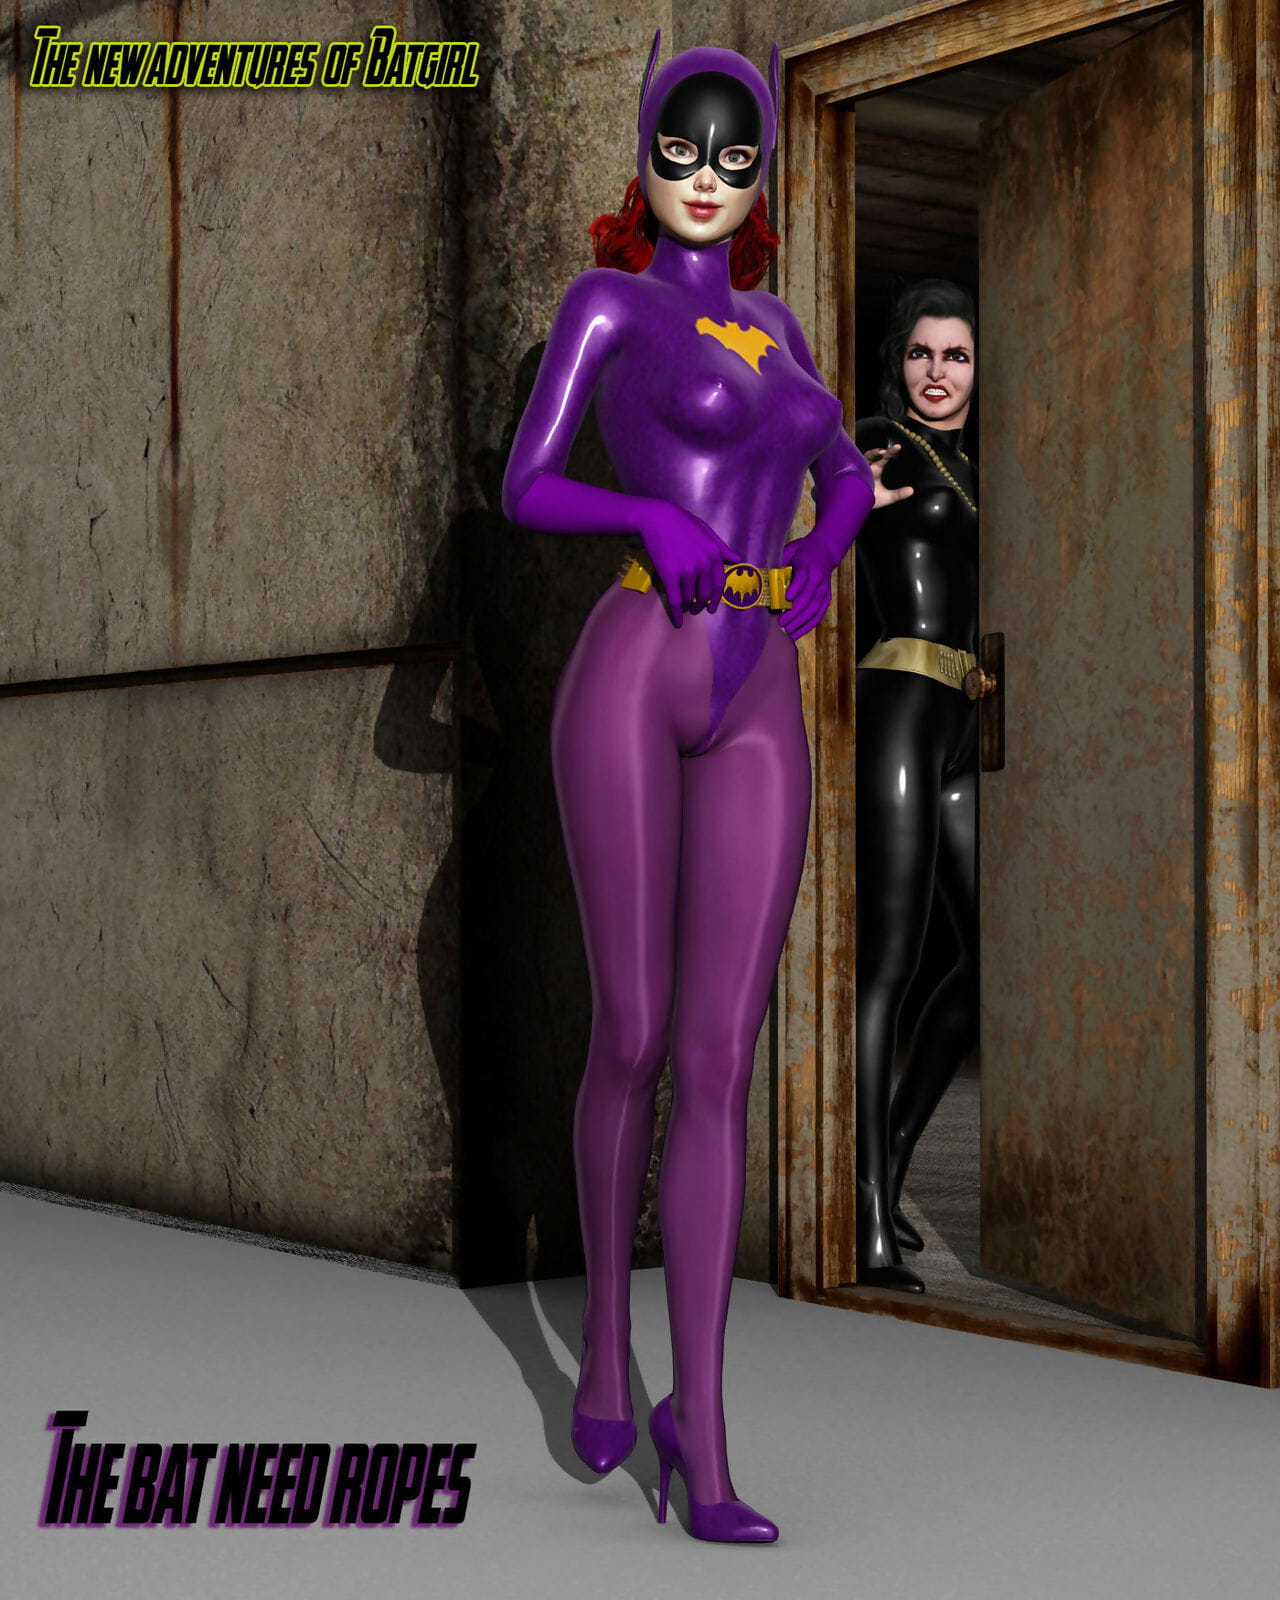 Yvonne Craig The New Adventures Of Batgirl: The Bat Need Ropes